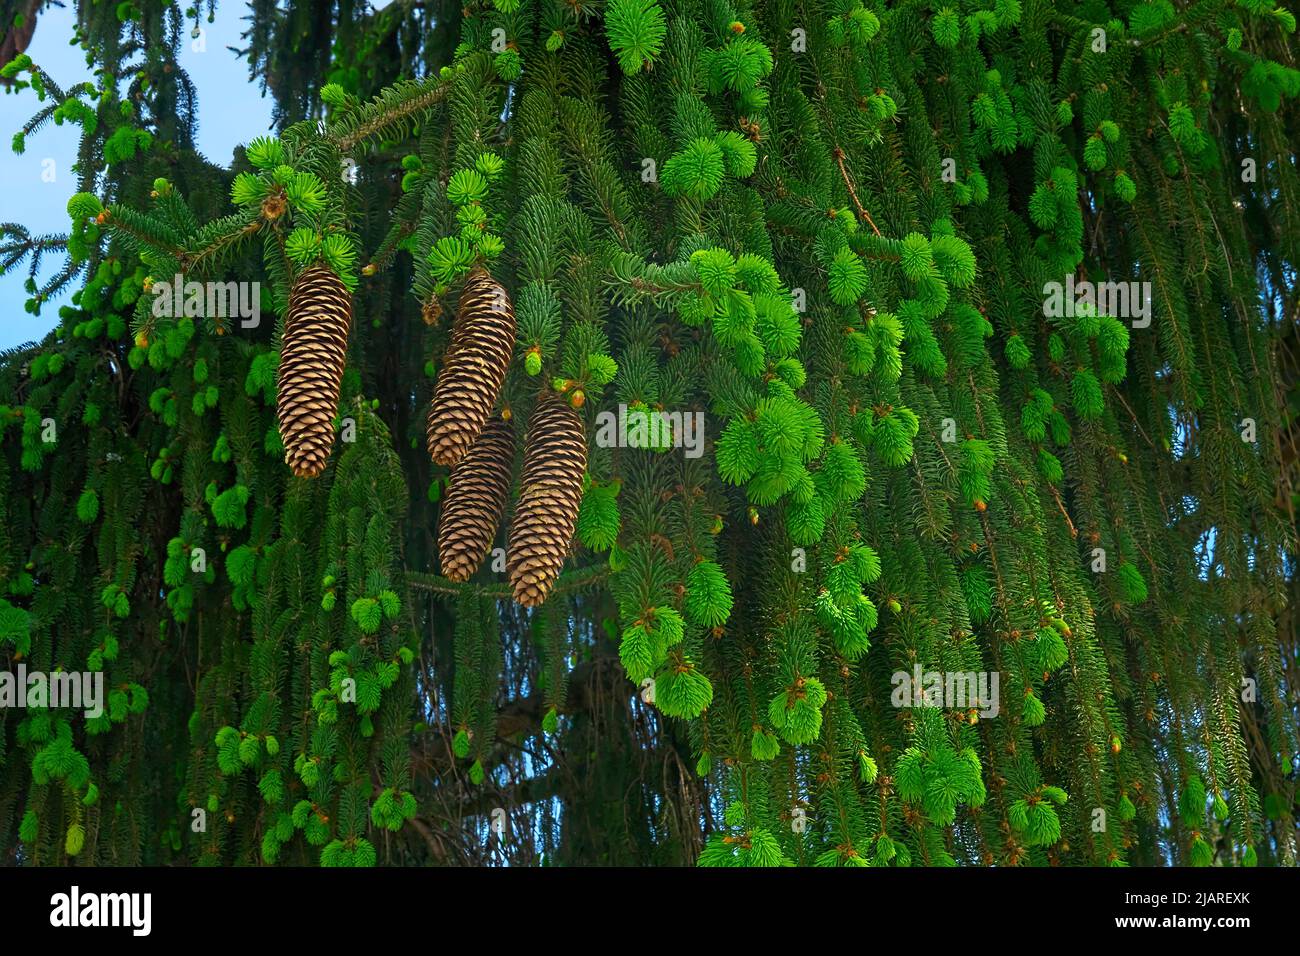 Norway Spruce tree with new growth and cones (Picea vabes). Stock Photo